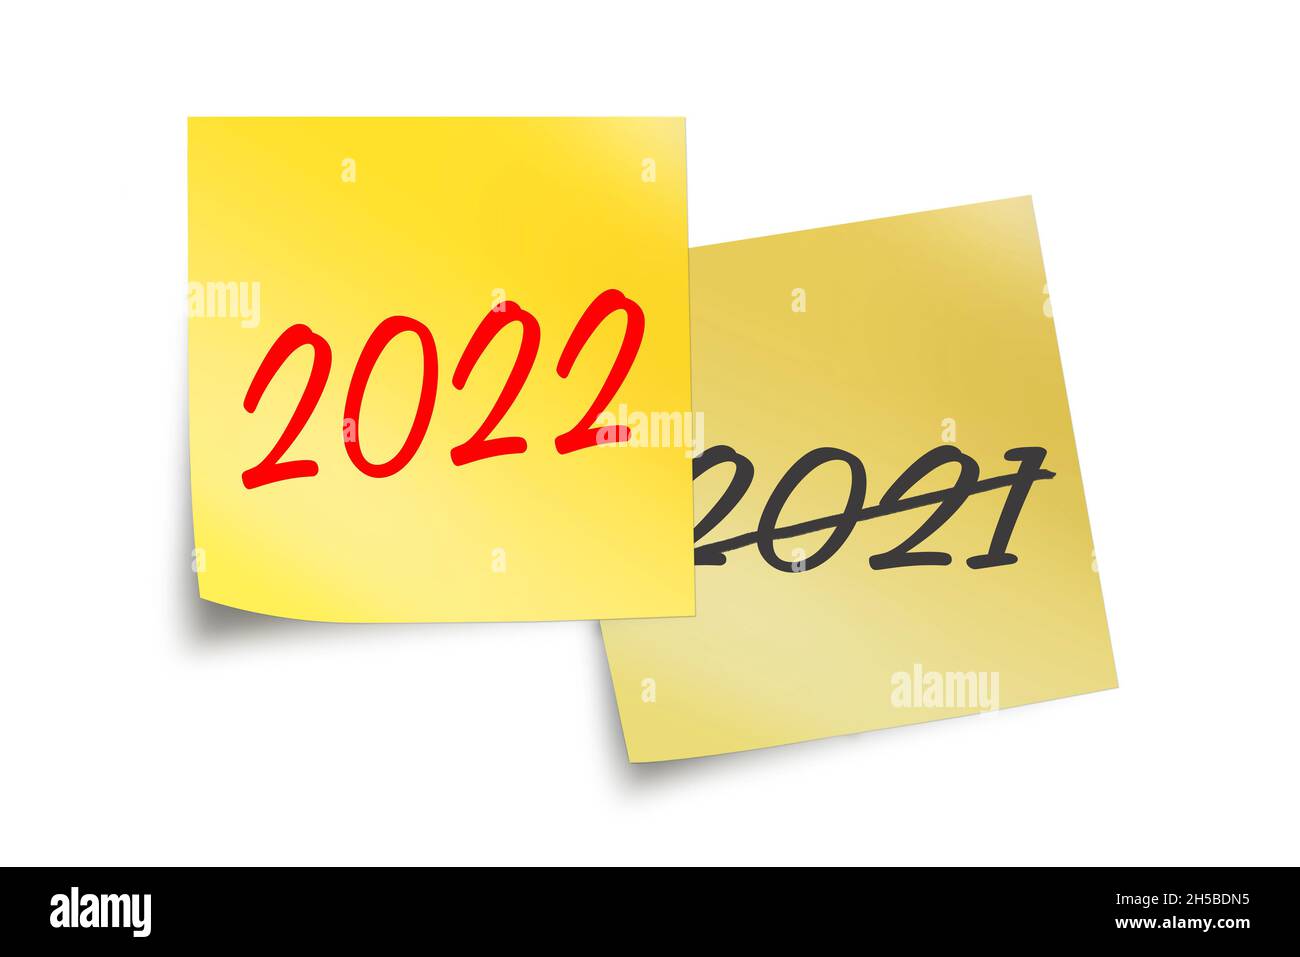 2021 and 2022 written on yellow sticky notes isolated on white Stock Photo